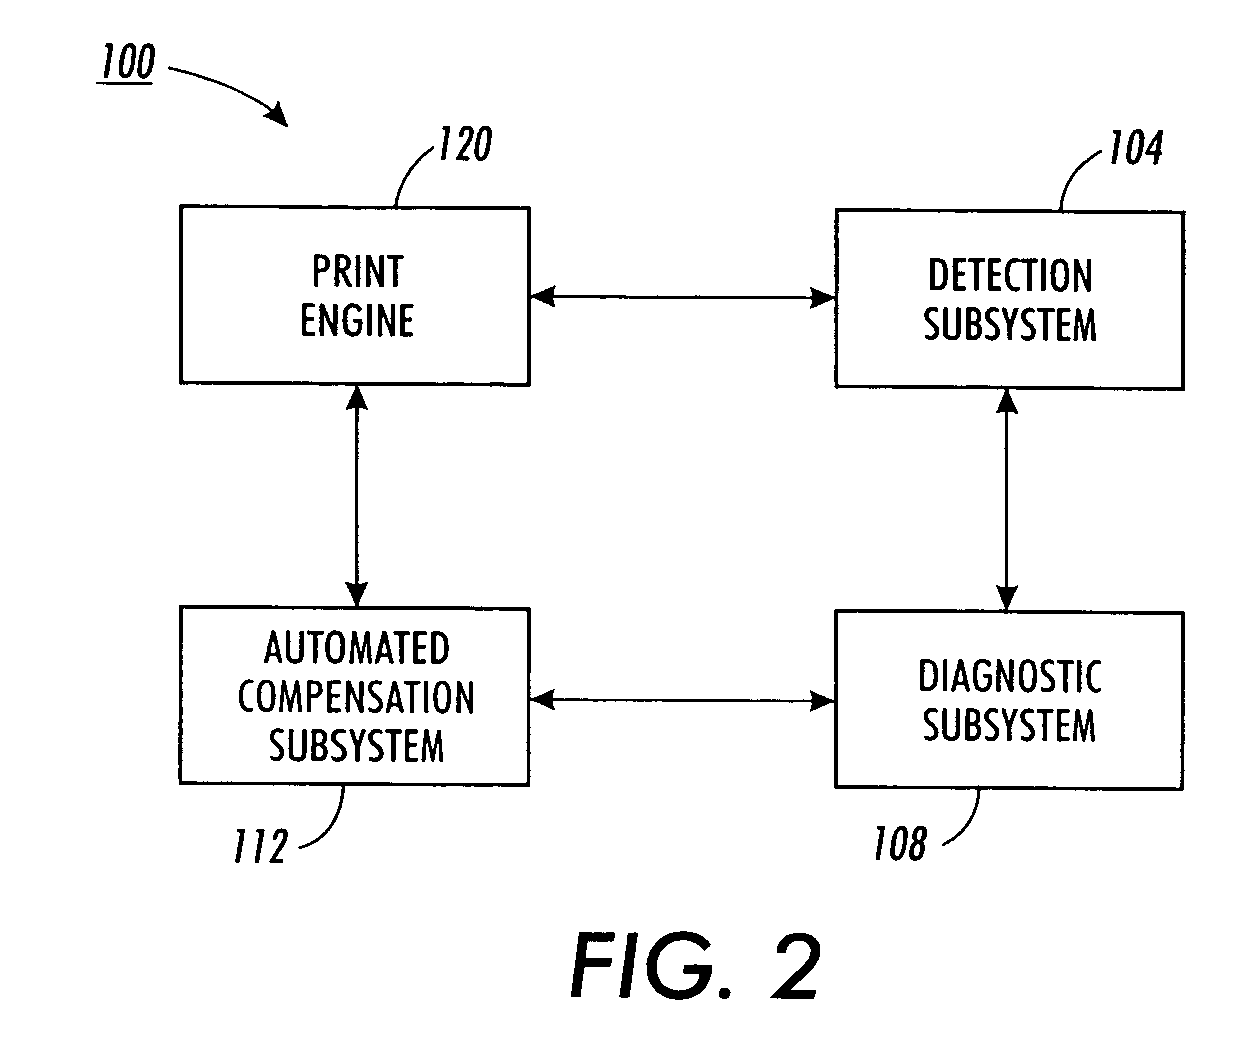 Method and system for automatically compensating for diagnosed banding defects prior to the performance of remedial service